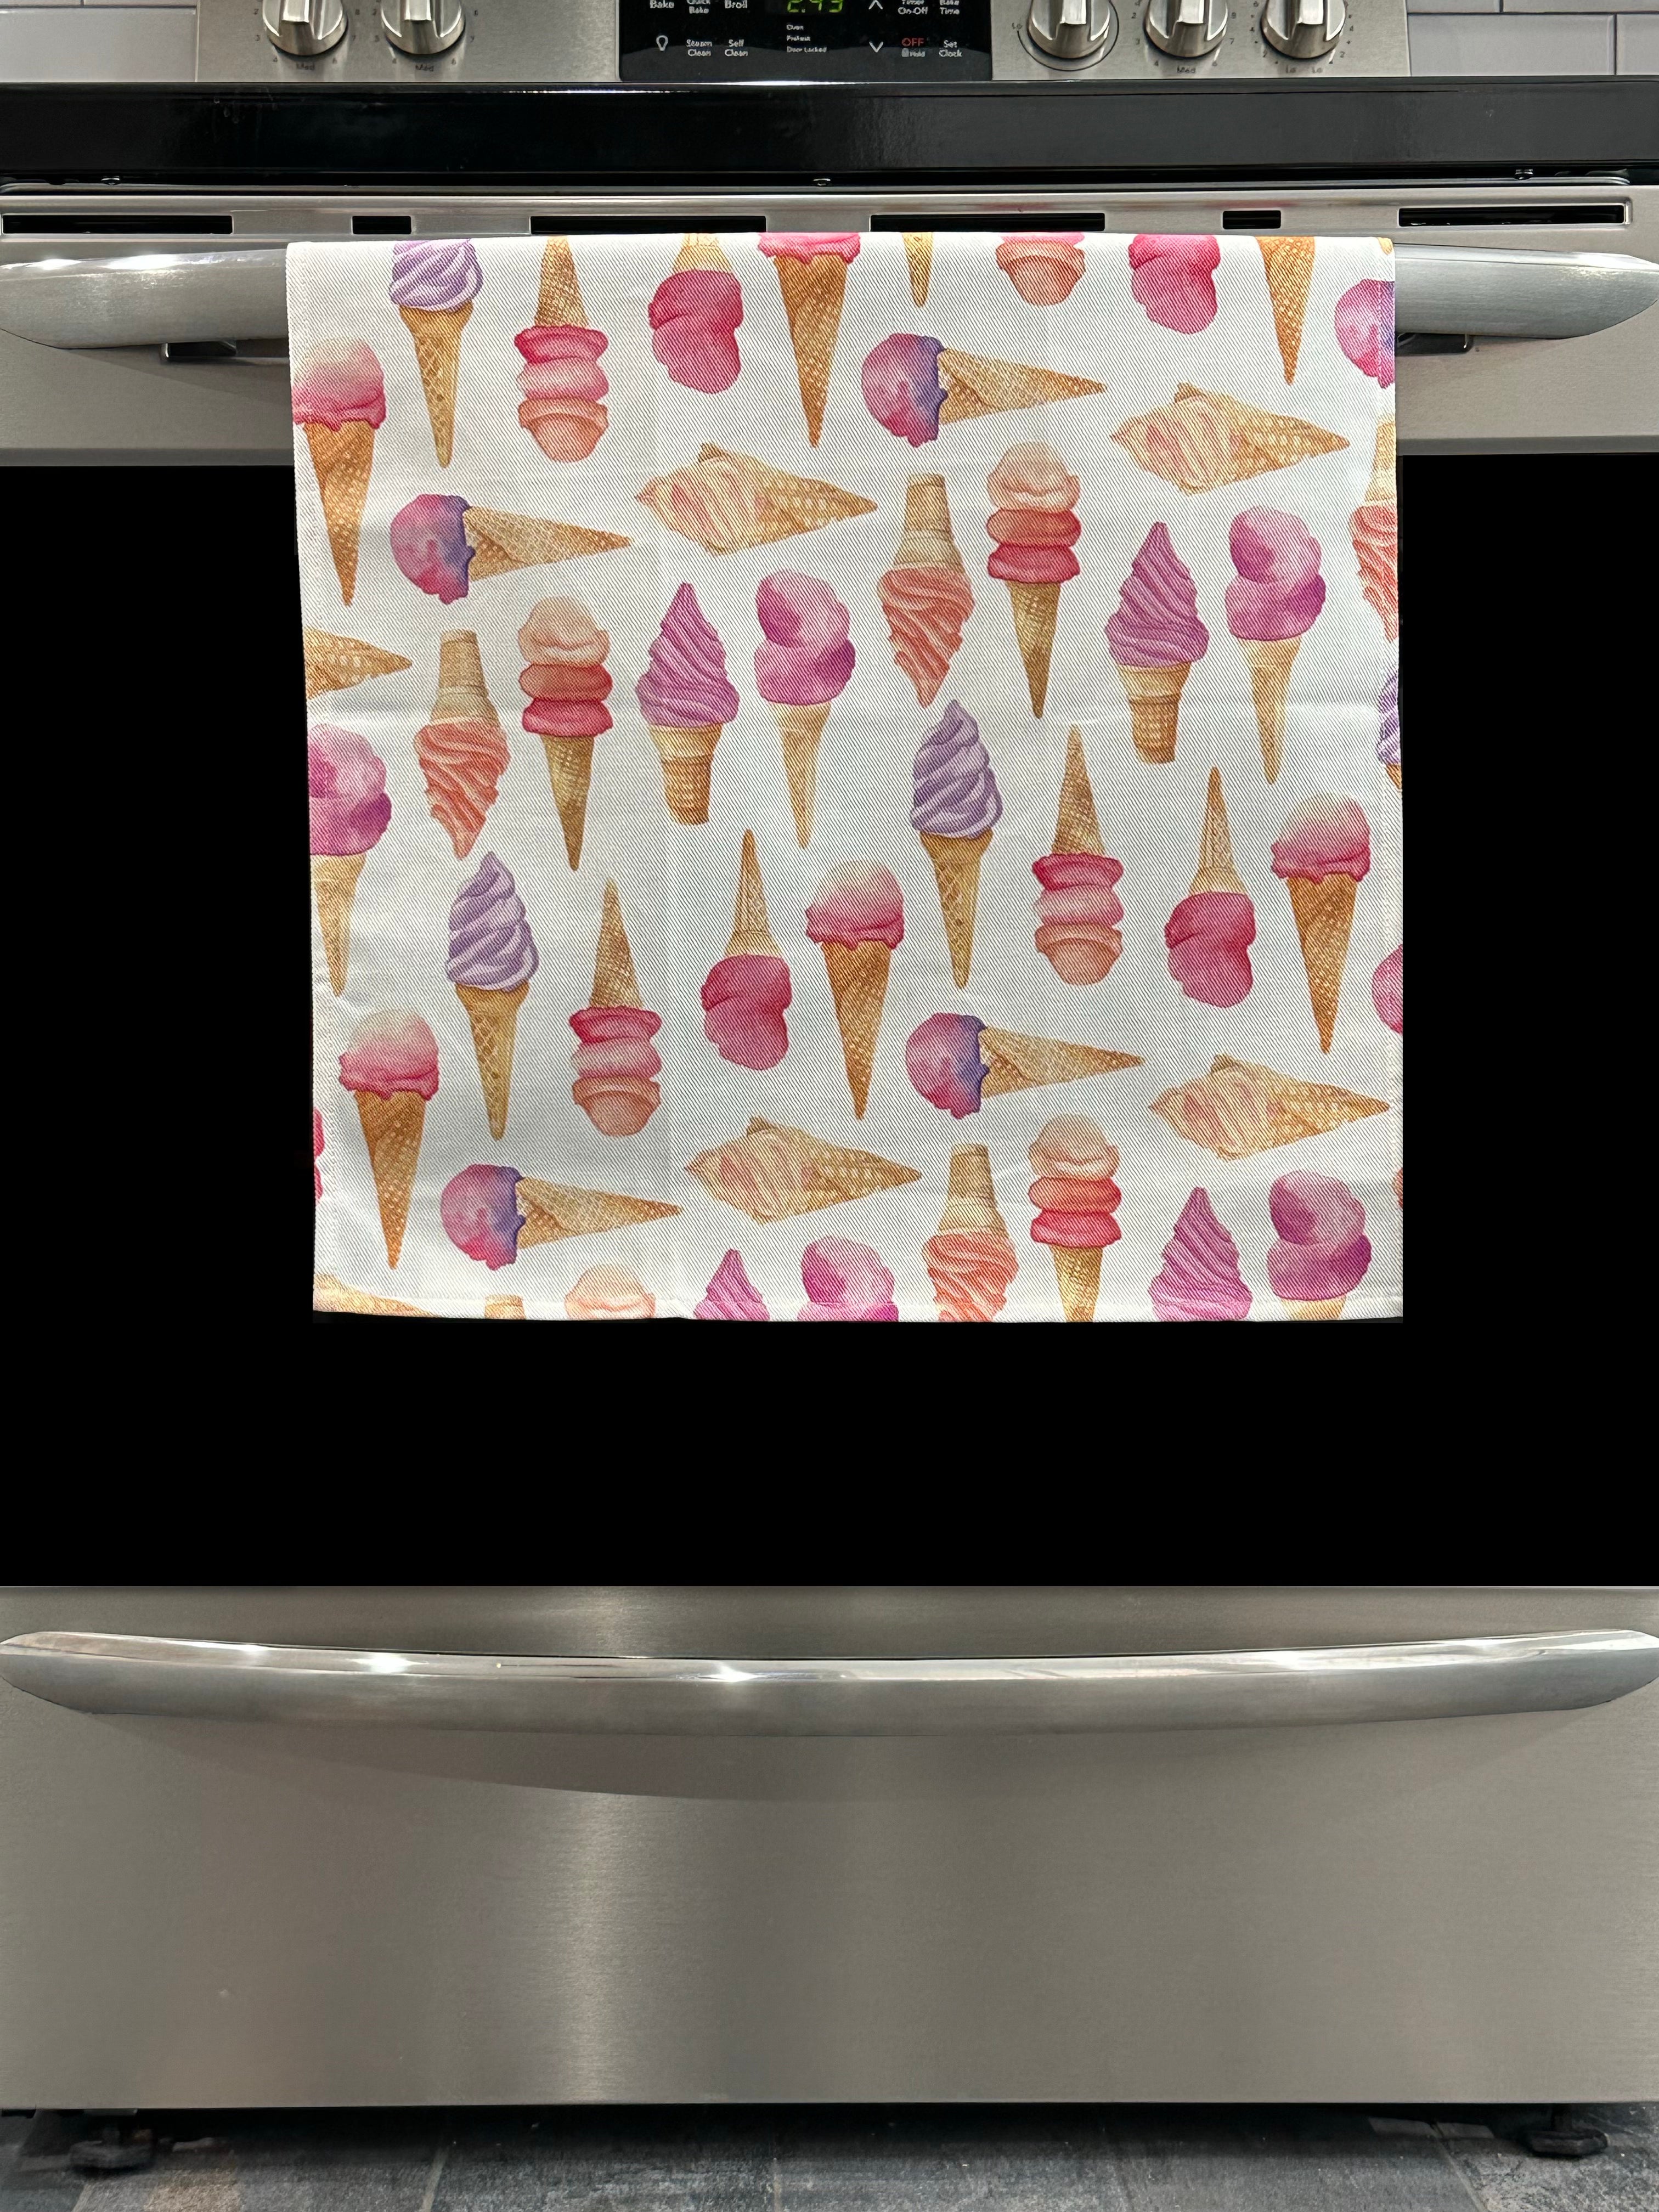 Kitchen Towel featuring a pastel ice cream cone design. Pictured here hanging on a stove.